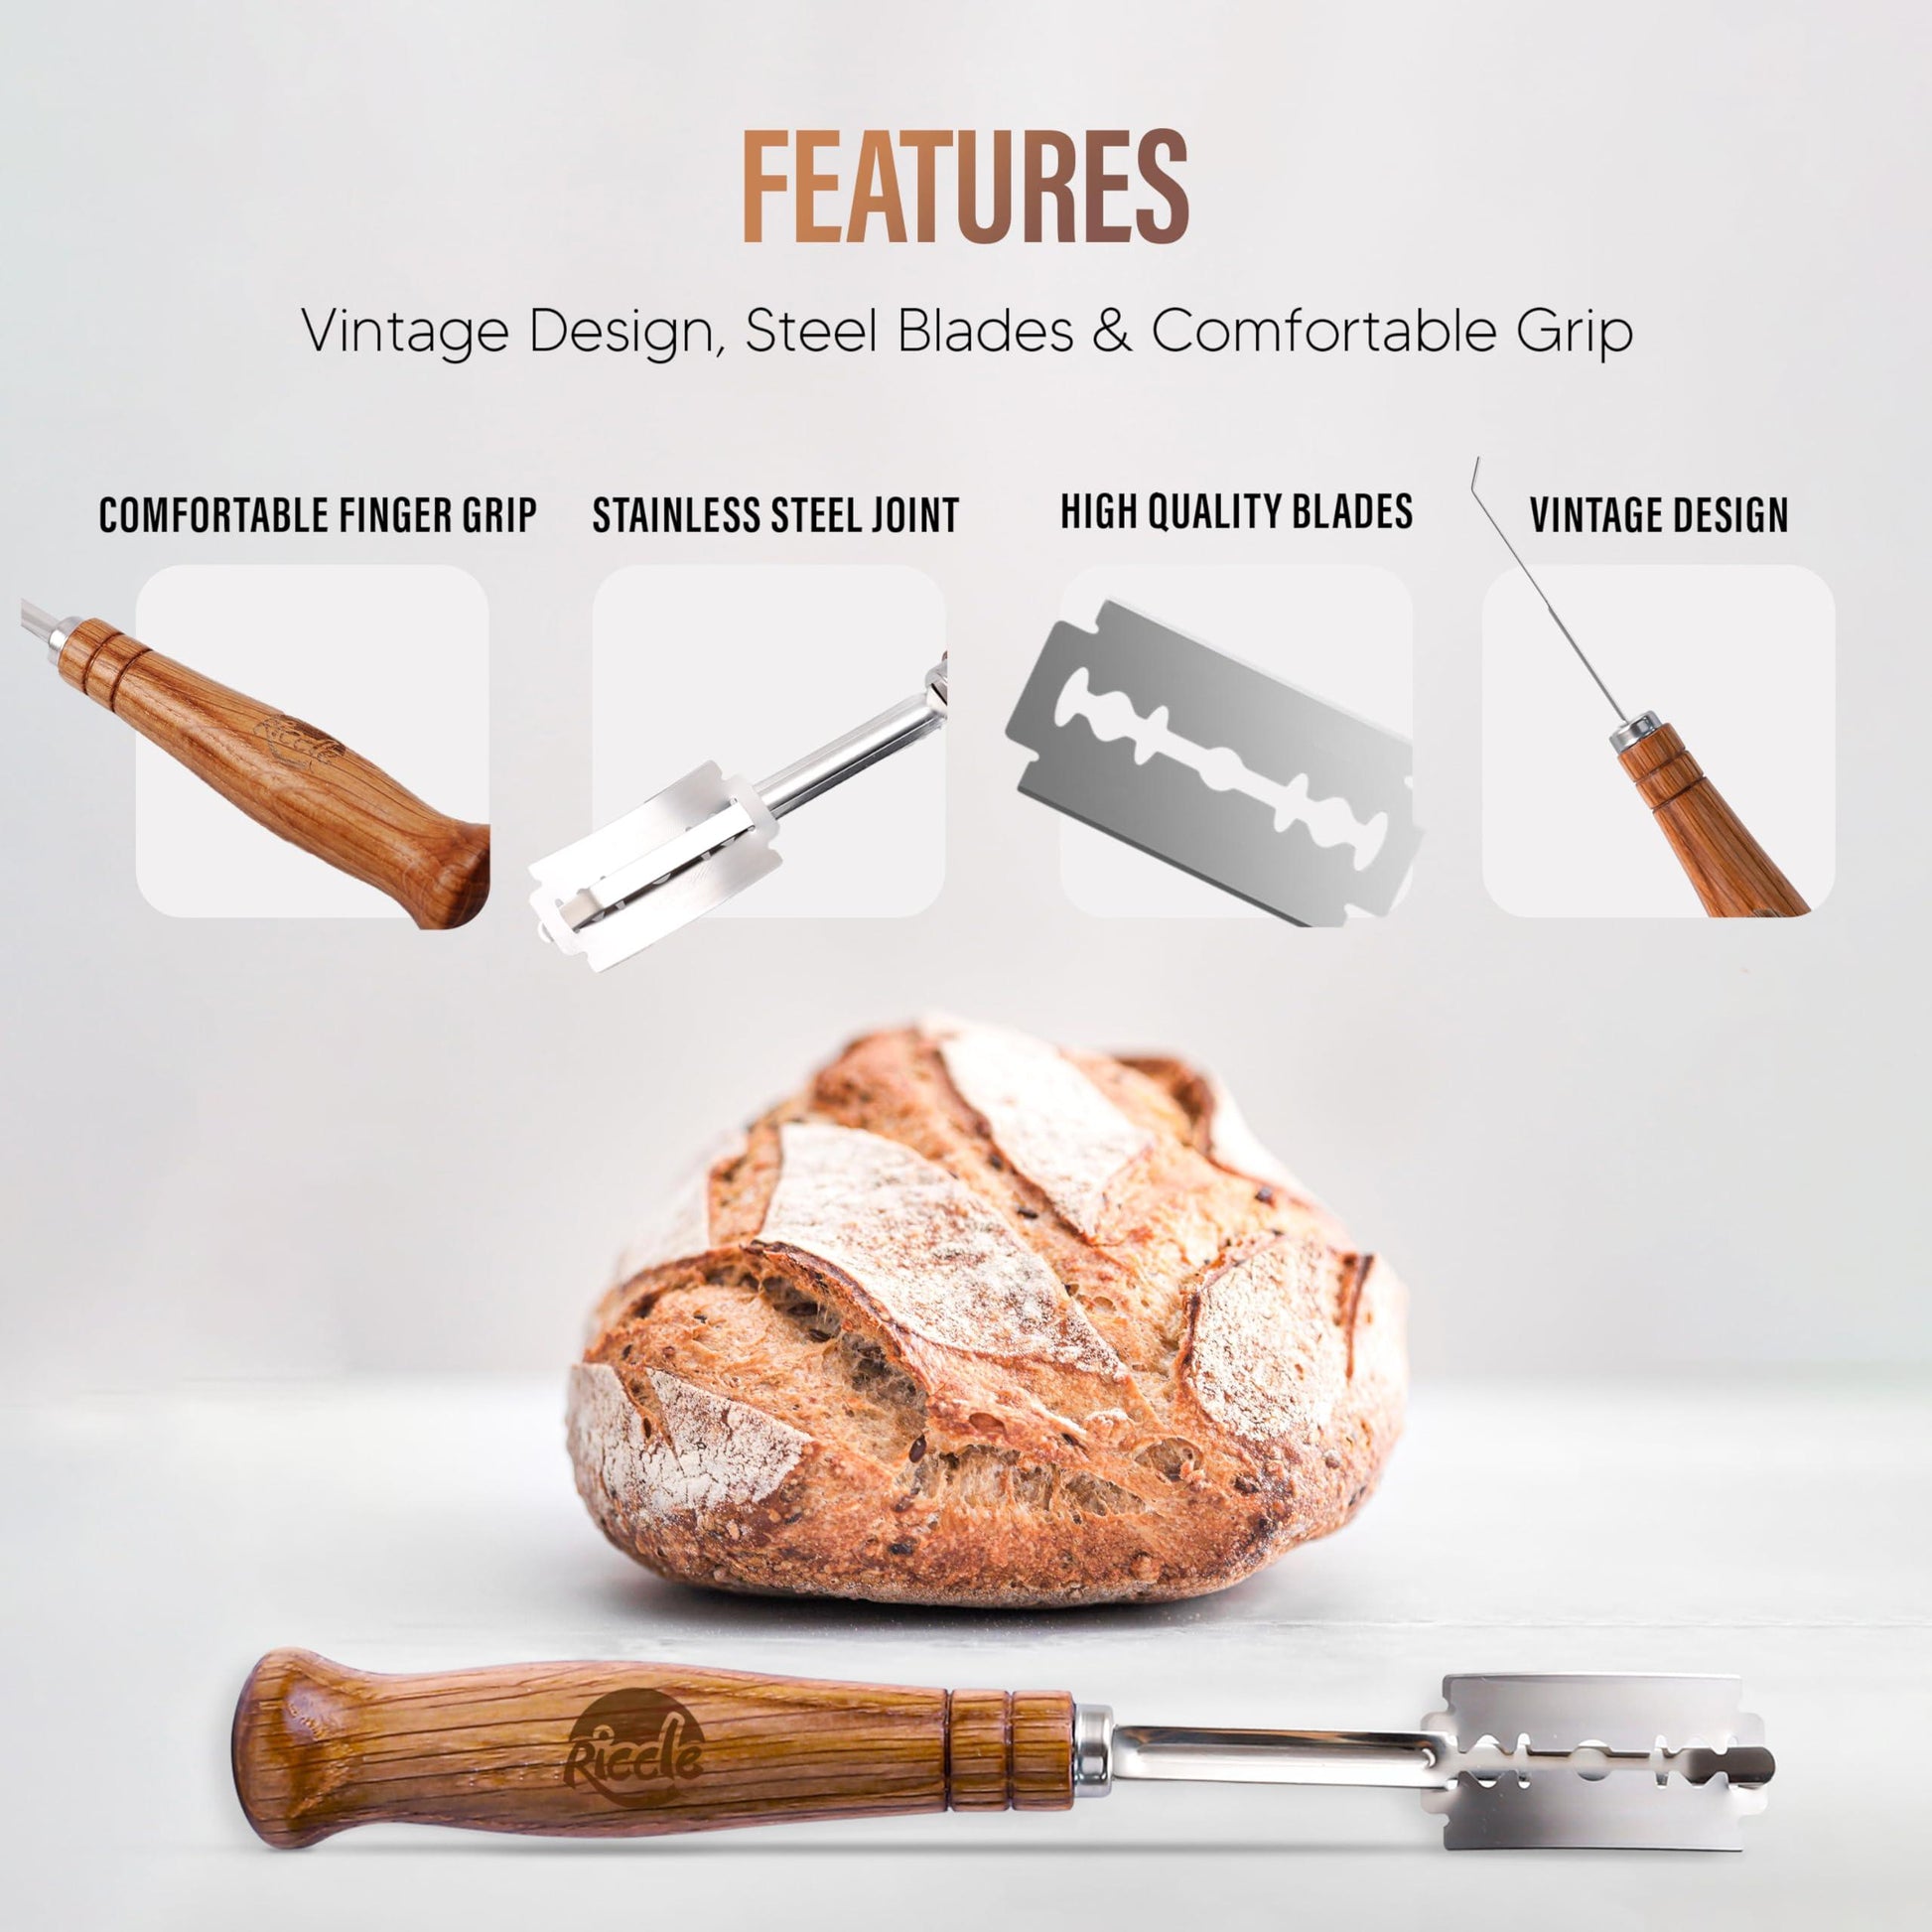 RICCLE Bread Lame Slashing Tool, Dough Scoring Knife with 15 Razor Blades and Storage Cover - CookCave